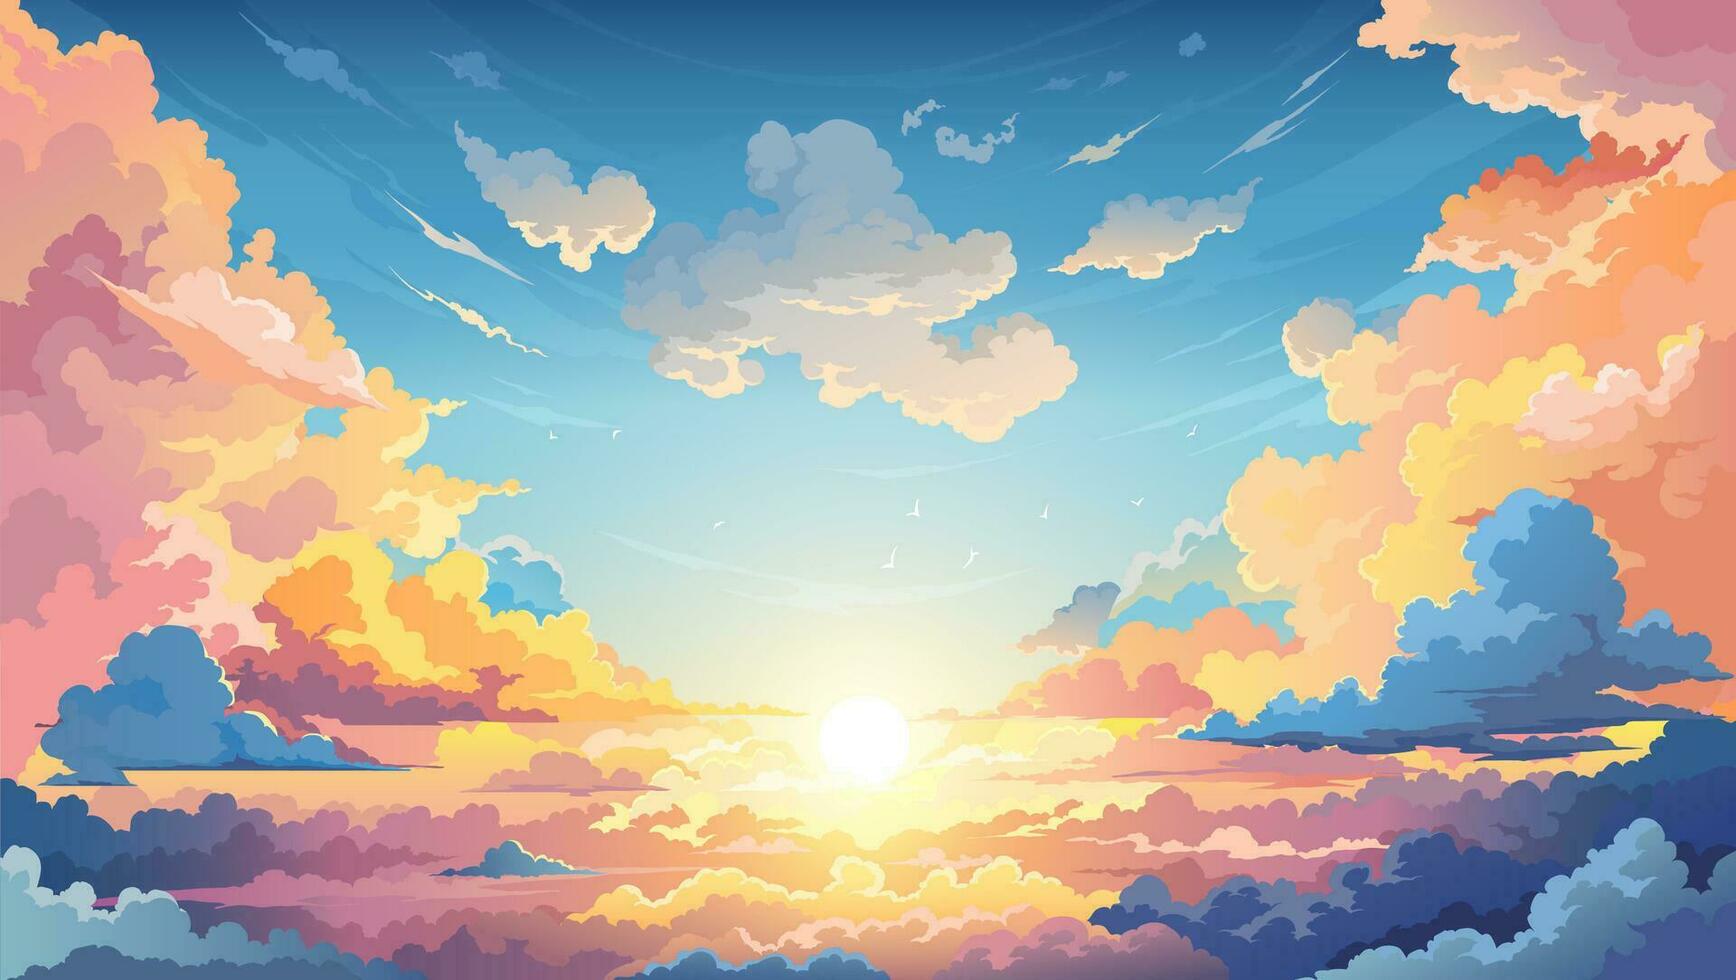 Sky sunset anime background with clouds on horizon vector